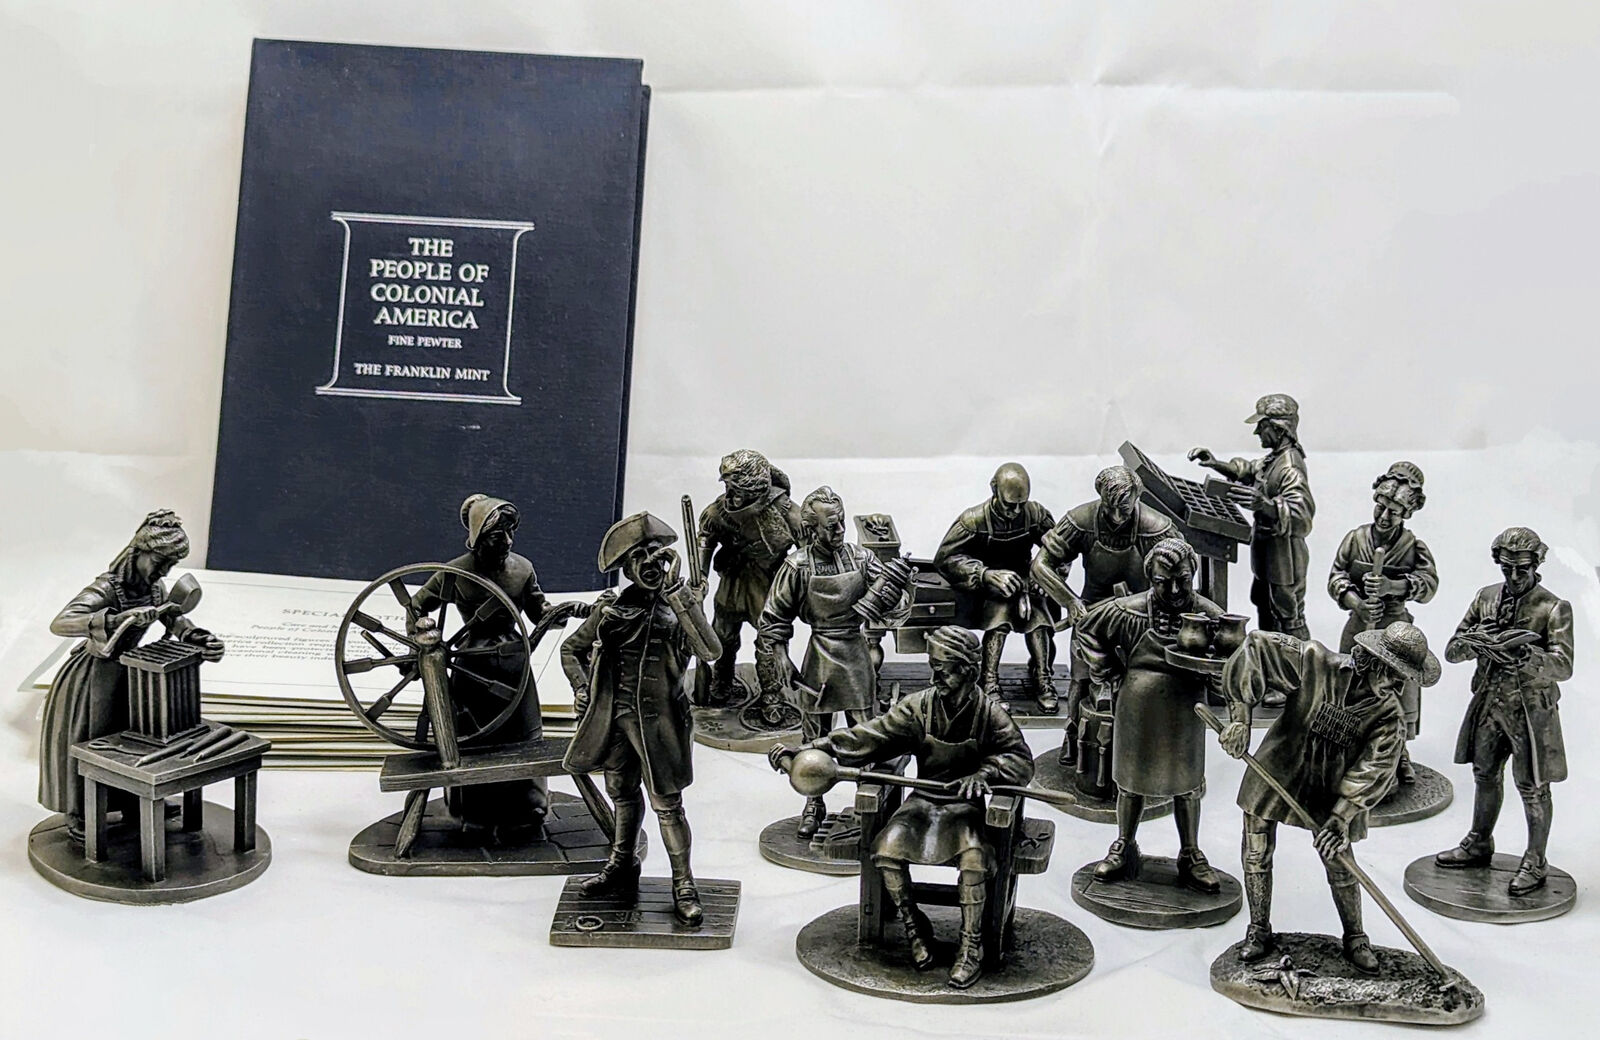 13 Franklin Mint Fine Pewter People of Colonial America Figurines Complete - COA